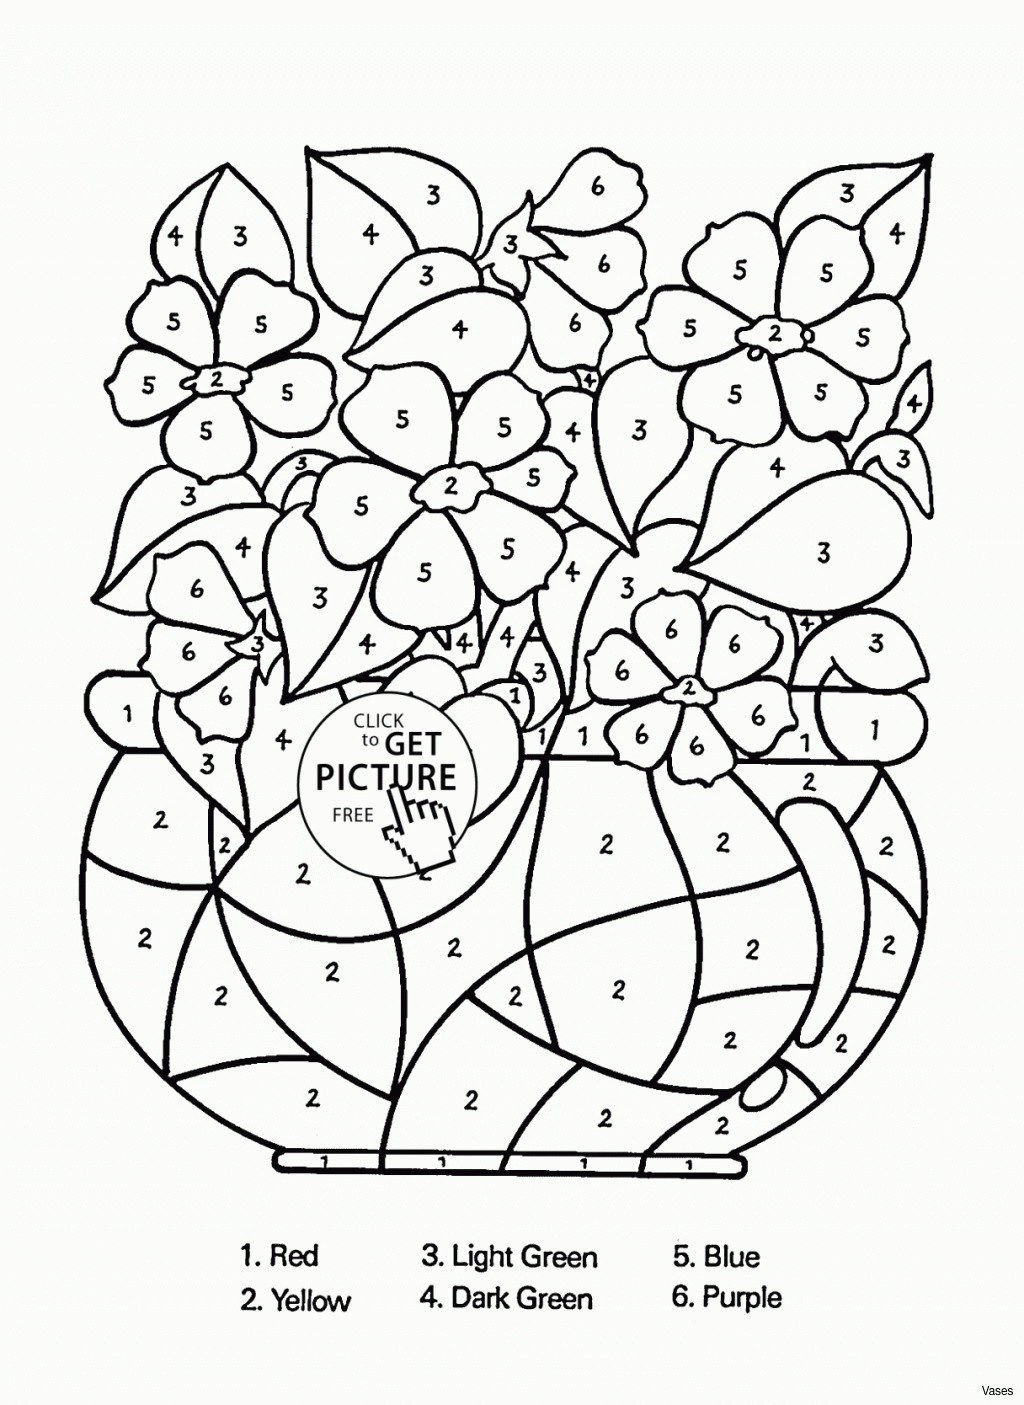 Tall Vase for Bamboo Of 5 Elegant Unique Flower Vases Pics Best Roses Flower Regarding Awesome Flowers Coloring Pages New Cool Vases Flower Vase Coloring Page Of 5 Elegant Unique Flower